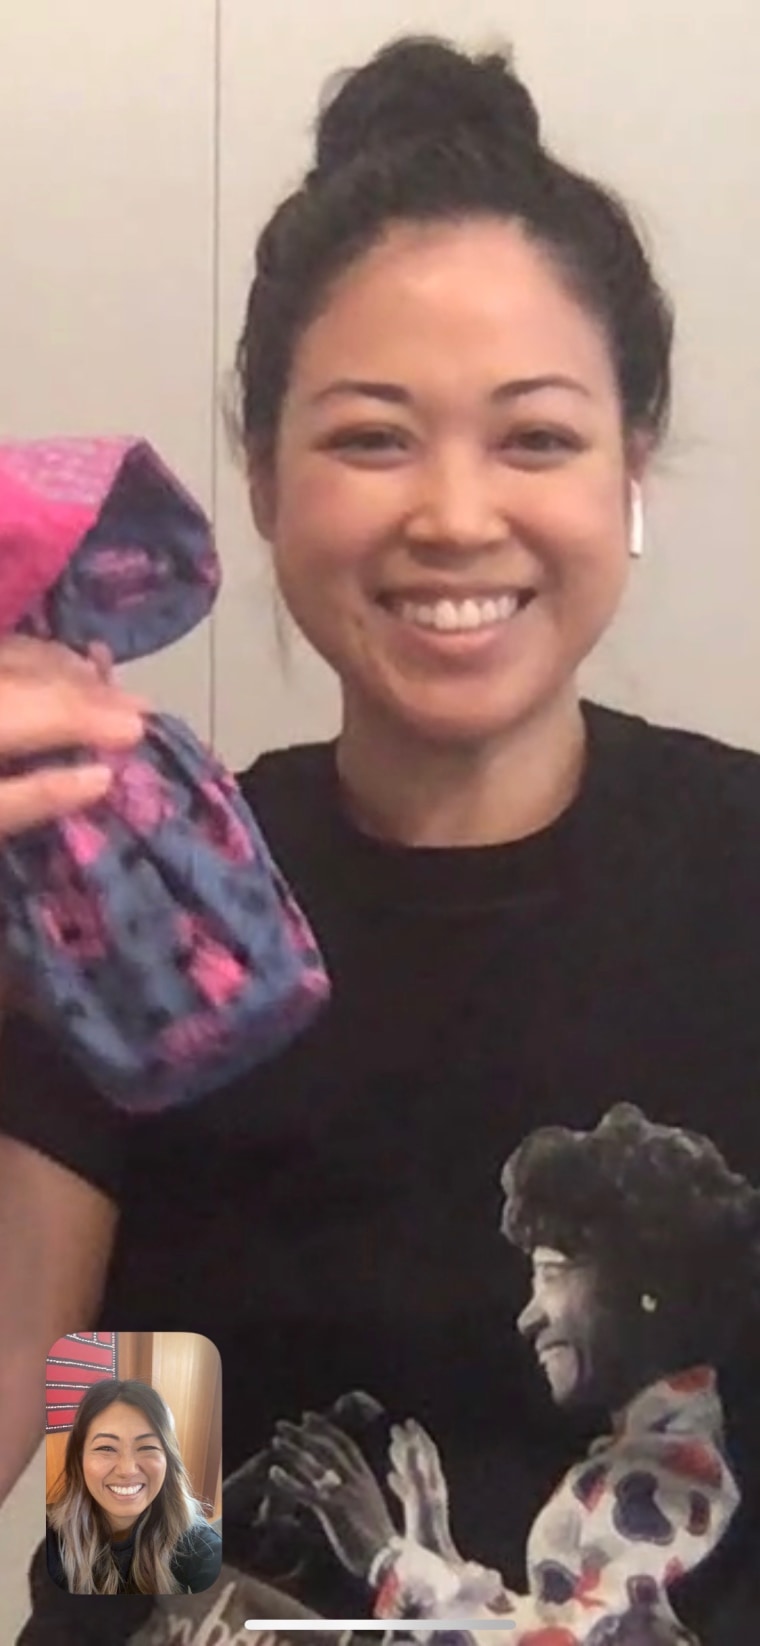 Lisa holding a mask while on FaceTime with Jane.